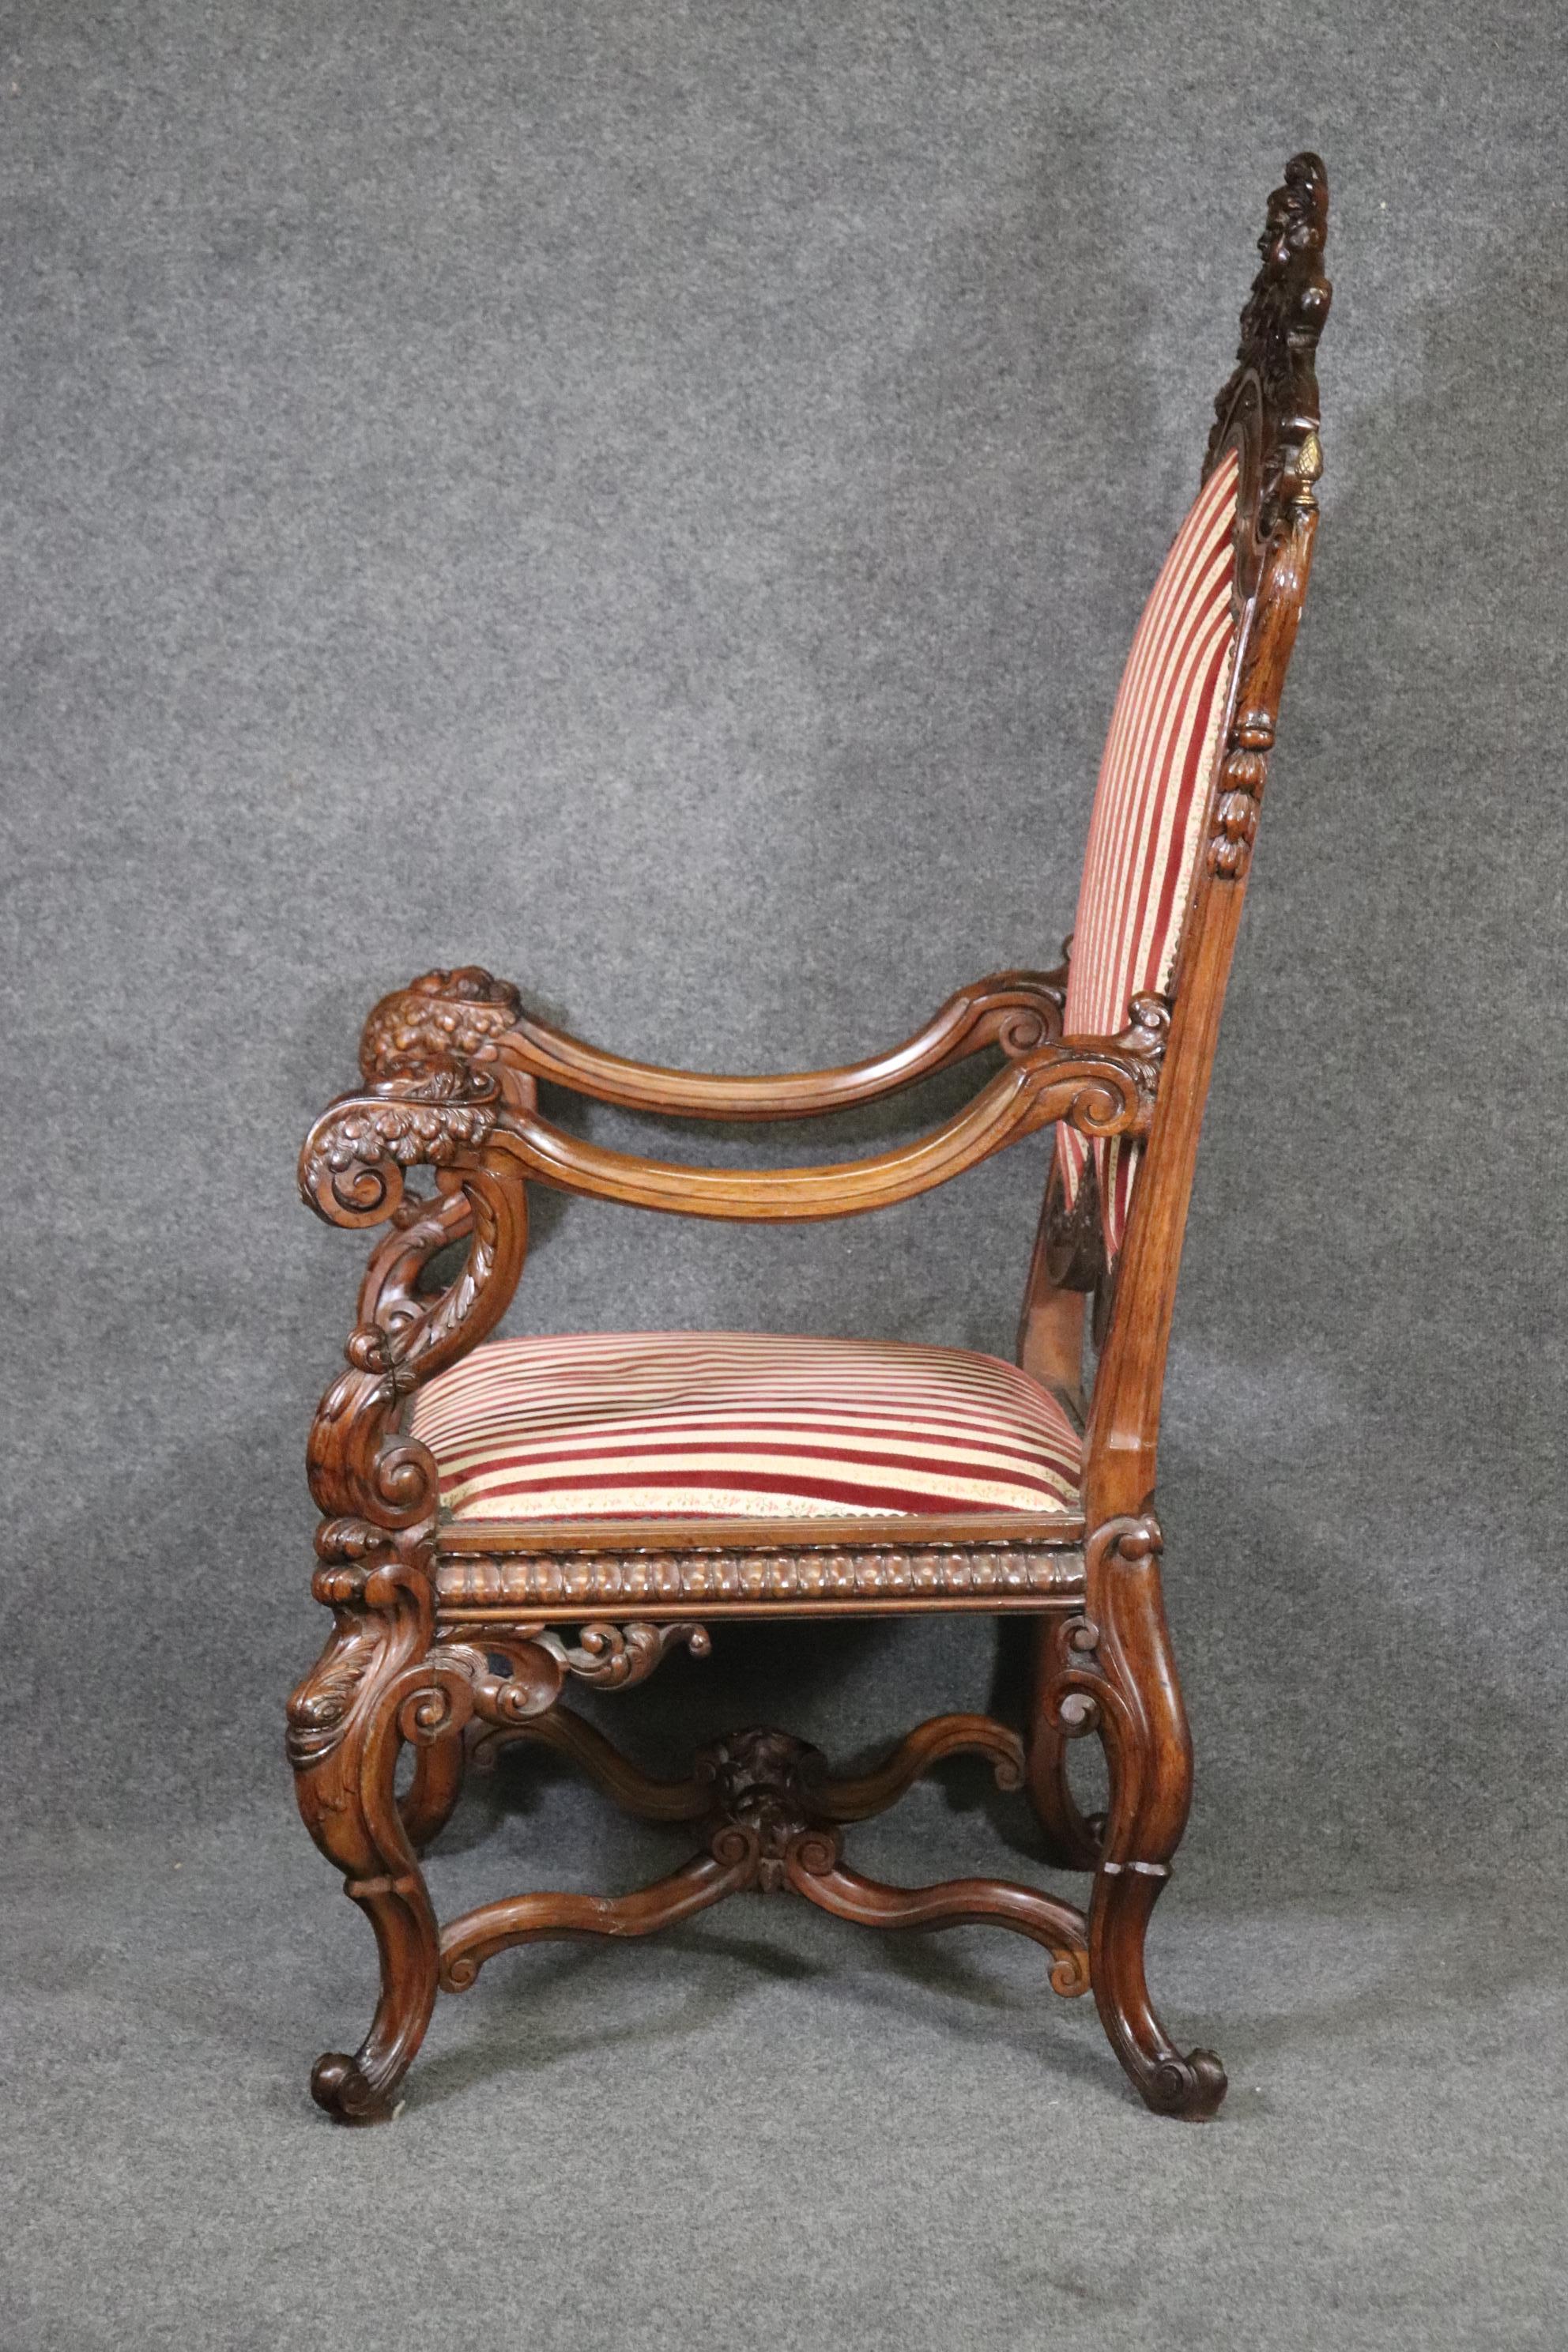 European Large Heavily Carved Figural Victorian Walnut Throne Chair with Putti Cherubs  For Sale